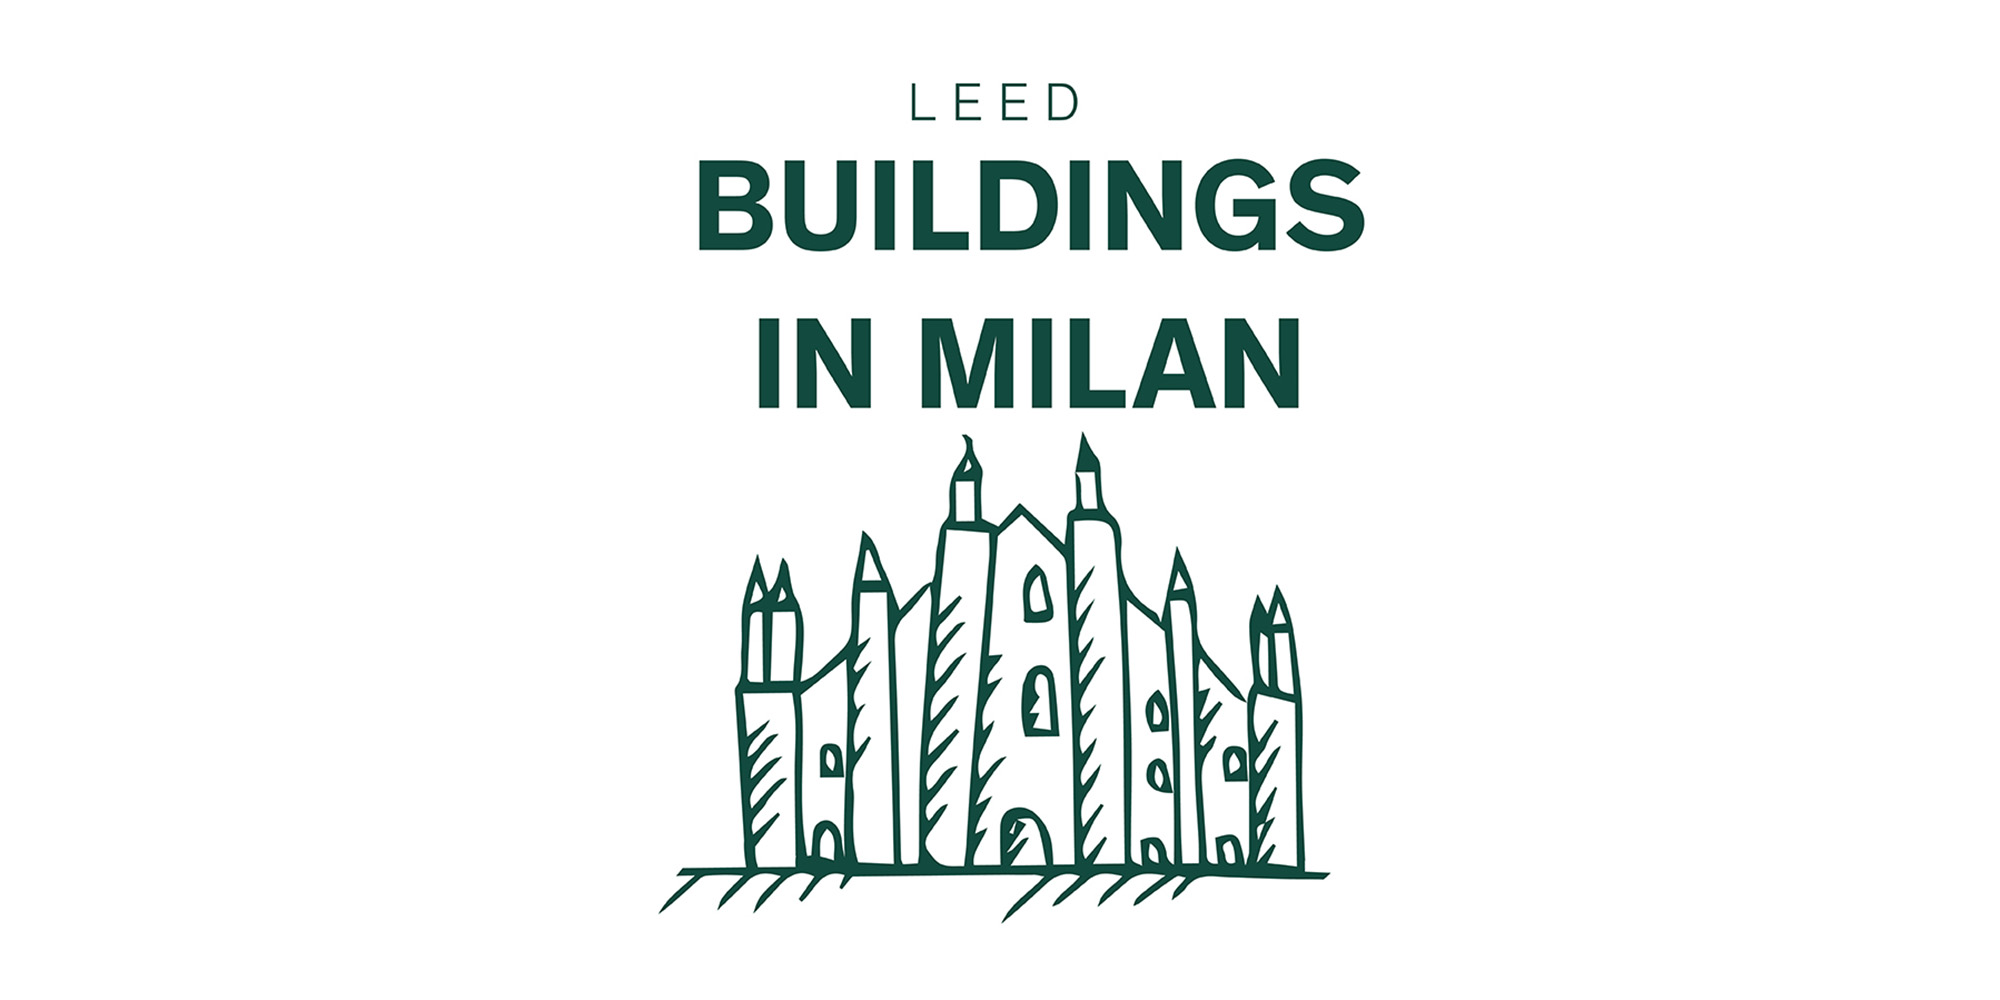 At Milan Design Week 2022, we are celebrating sustainable architecture